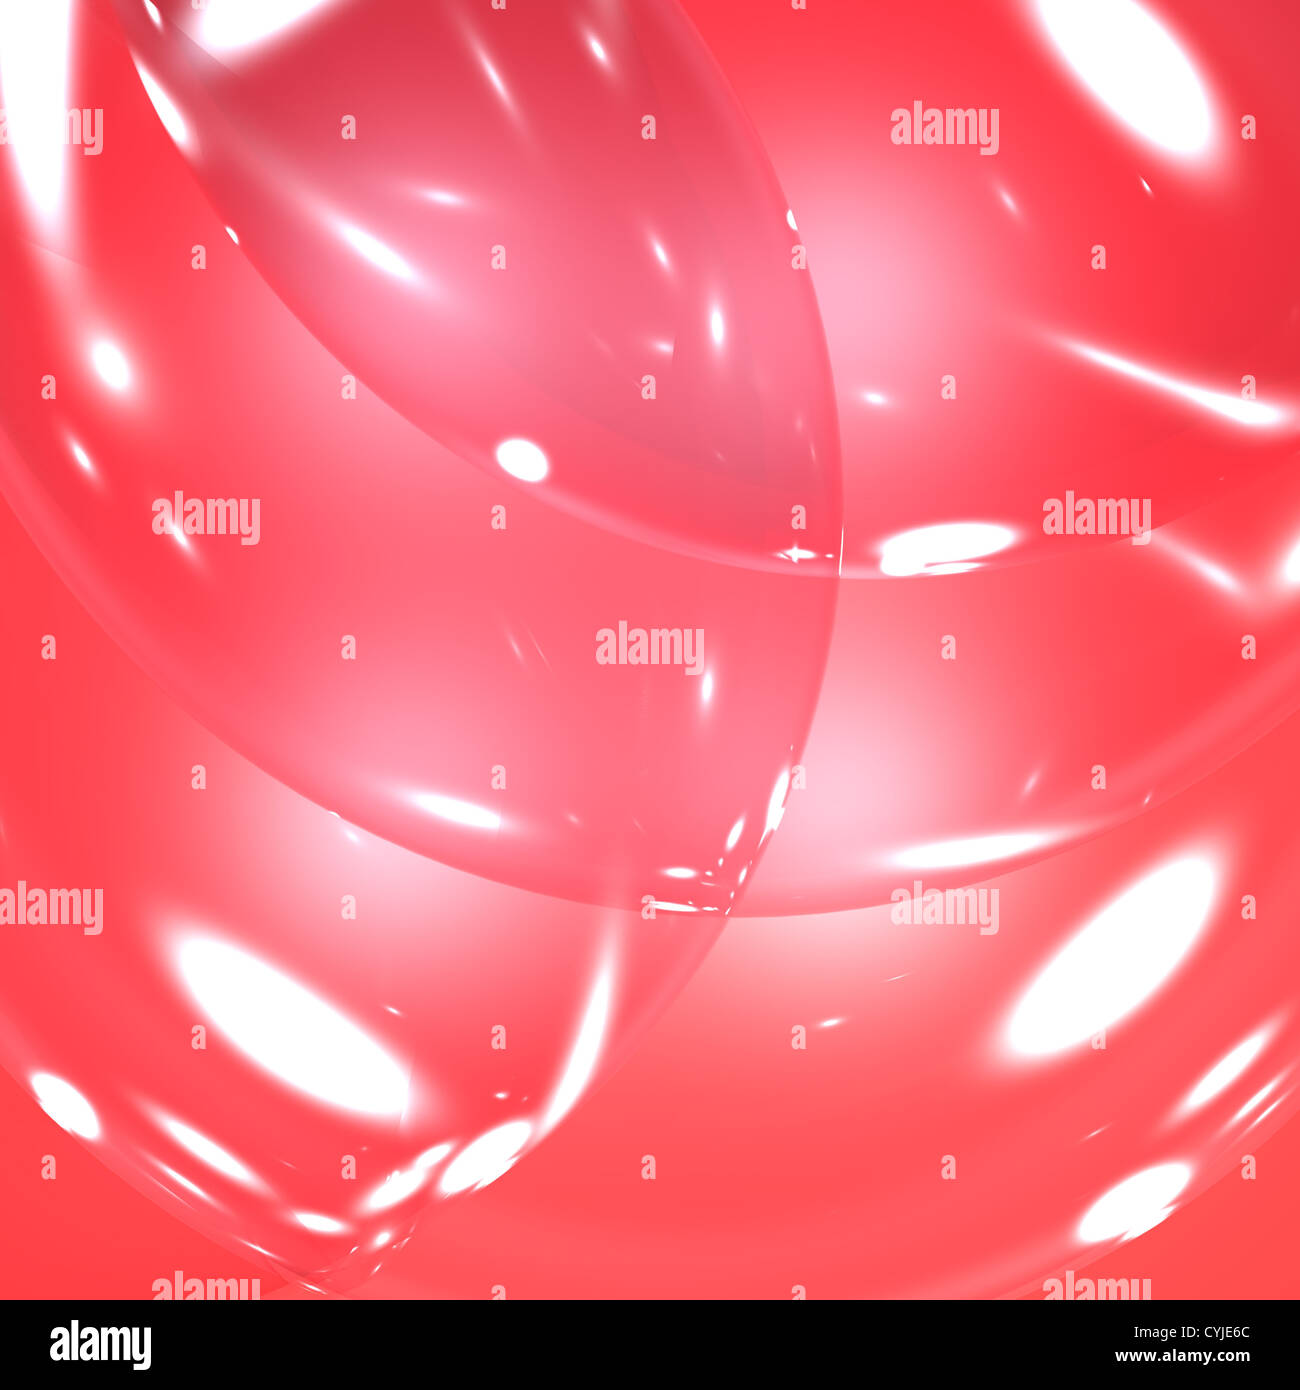 Light Streaks On Red Bubbles For Dramatic Backdrop Stock Photo